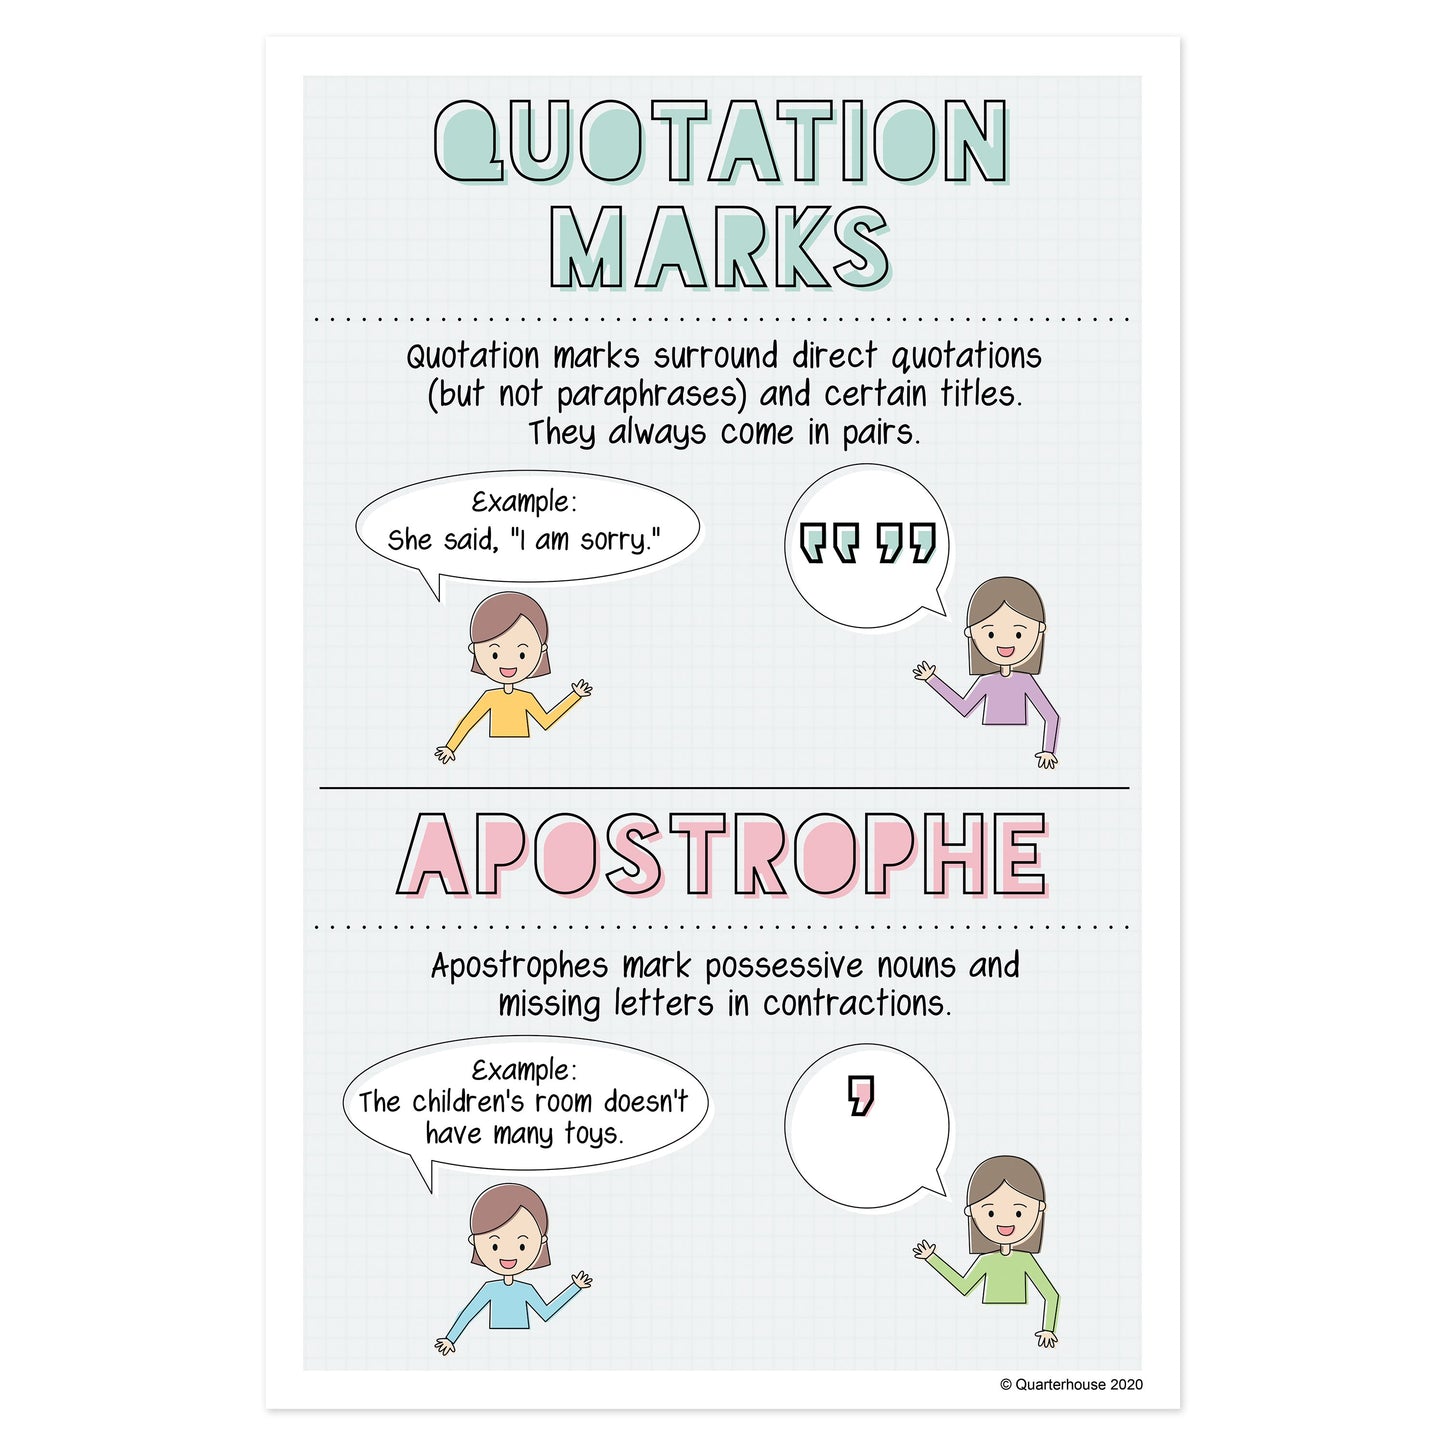 Quarterhouse Quotation Marks and Apostrophes Poster, English-Language Arts Classroom Materials for Teachers